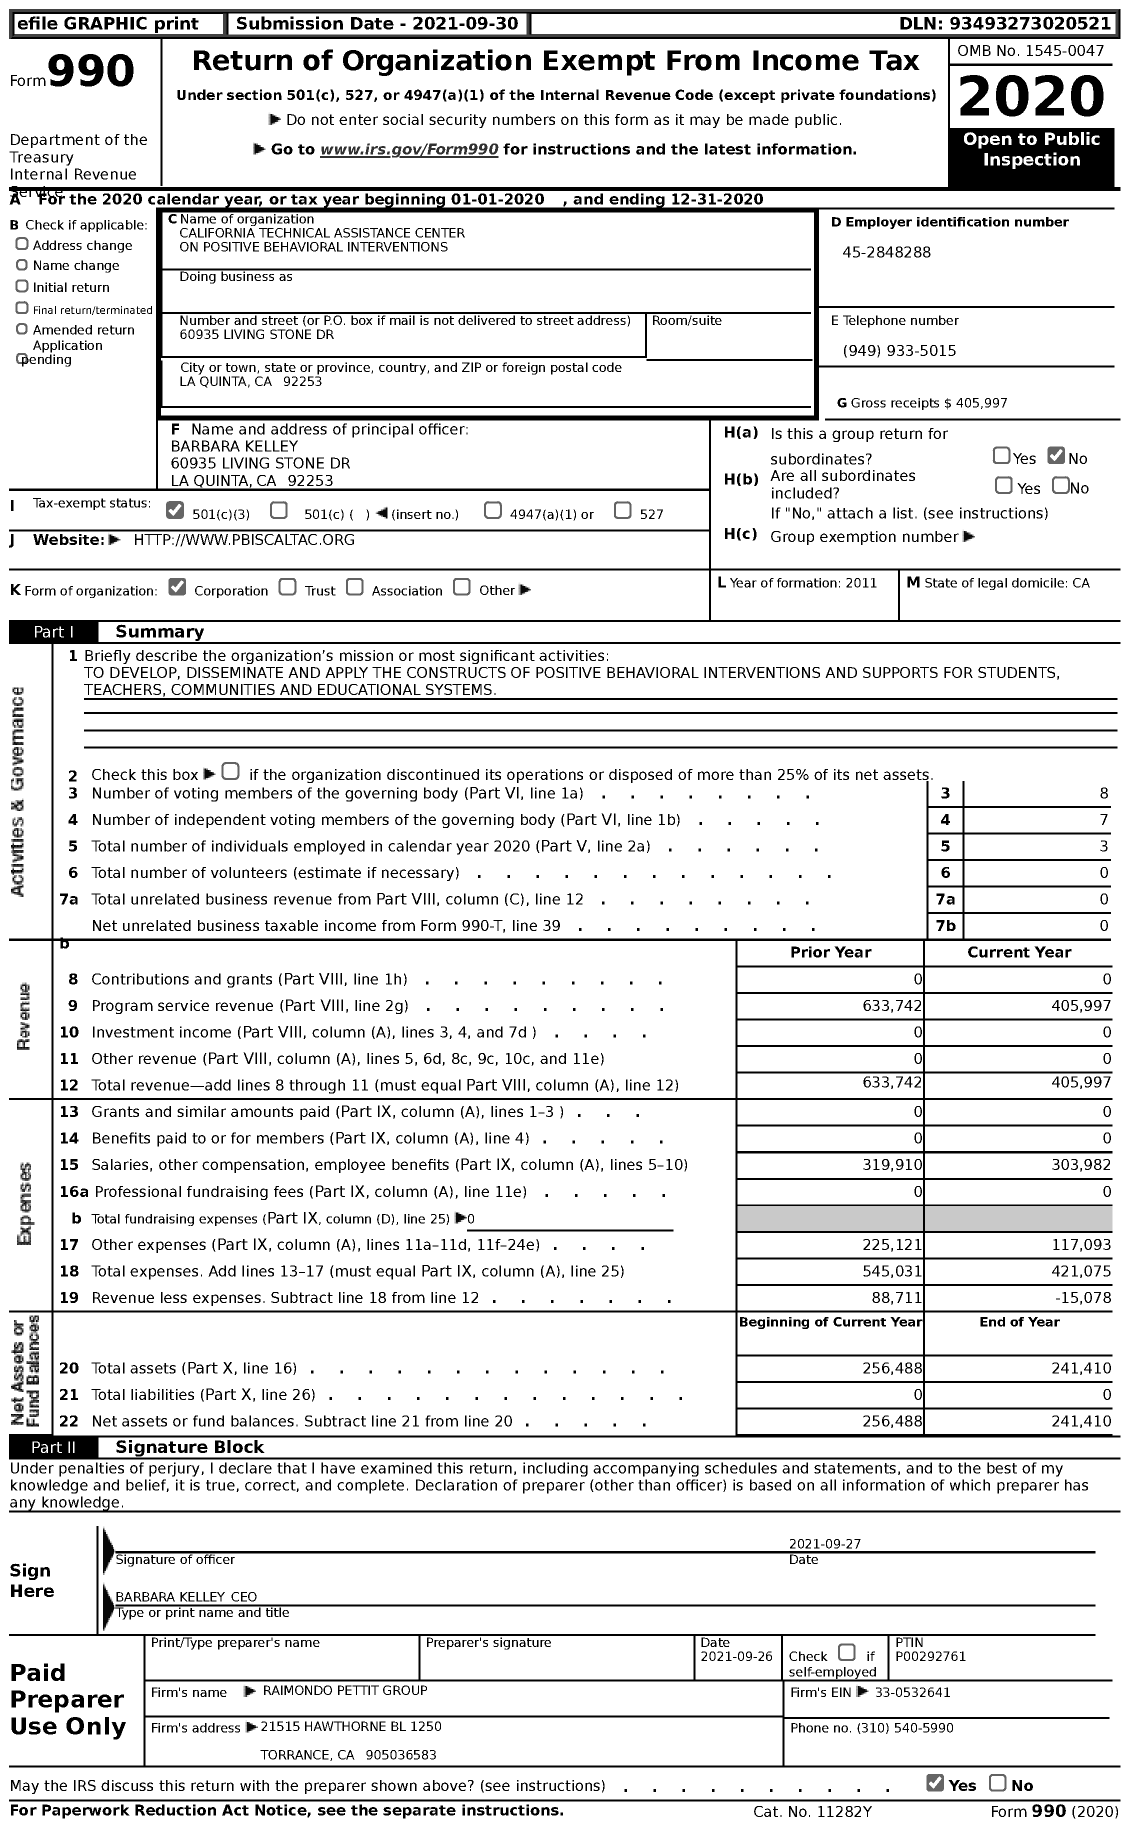 Image of first page of 2020 Form 990 for California Technical Assistance Center on Positive Behavioral Interventions